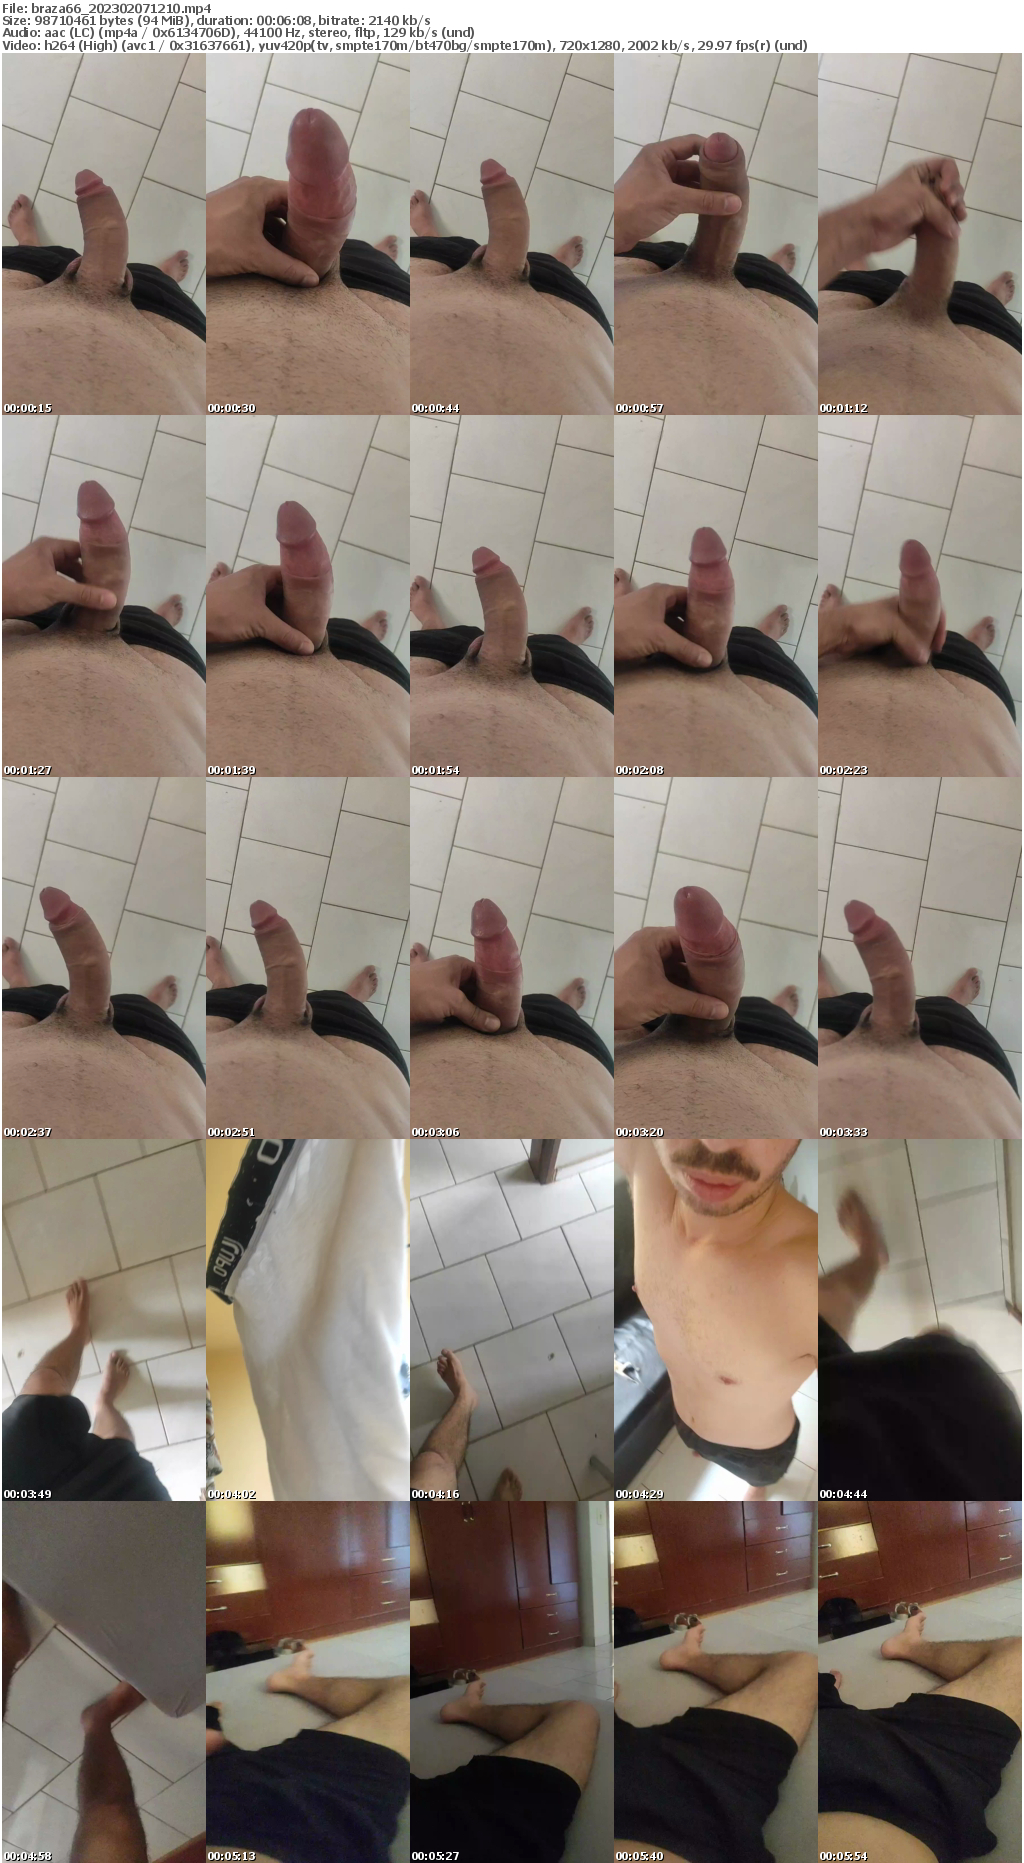 Preview thumb from braza66 on 2023-02-07 @ cam4